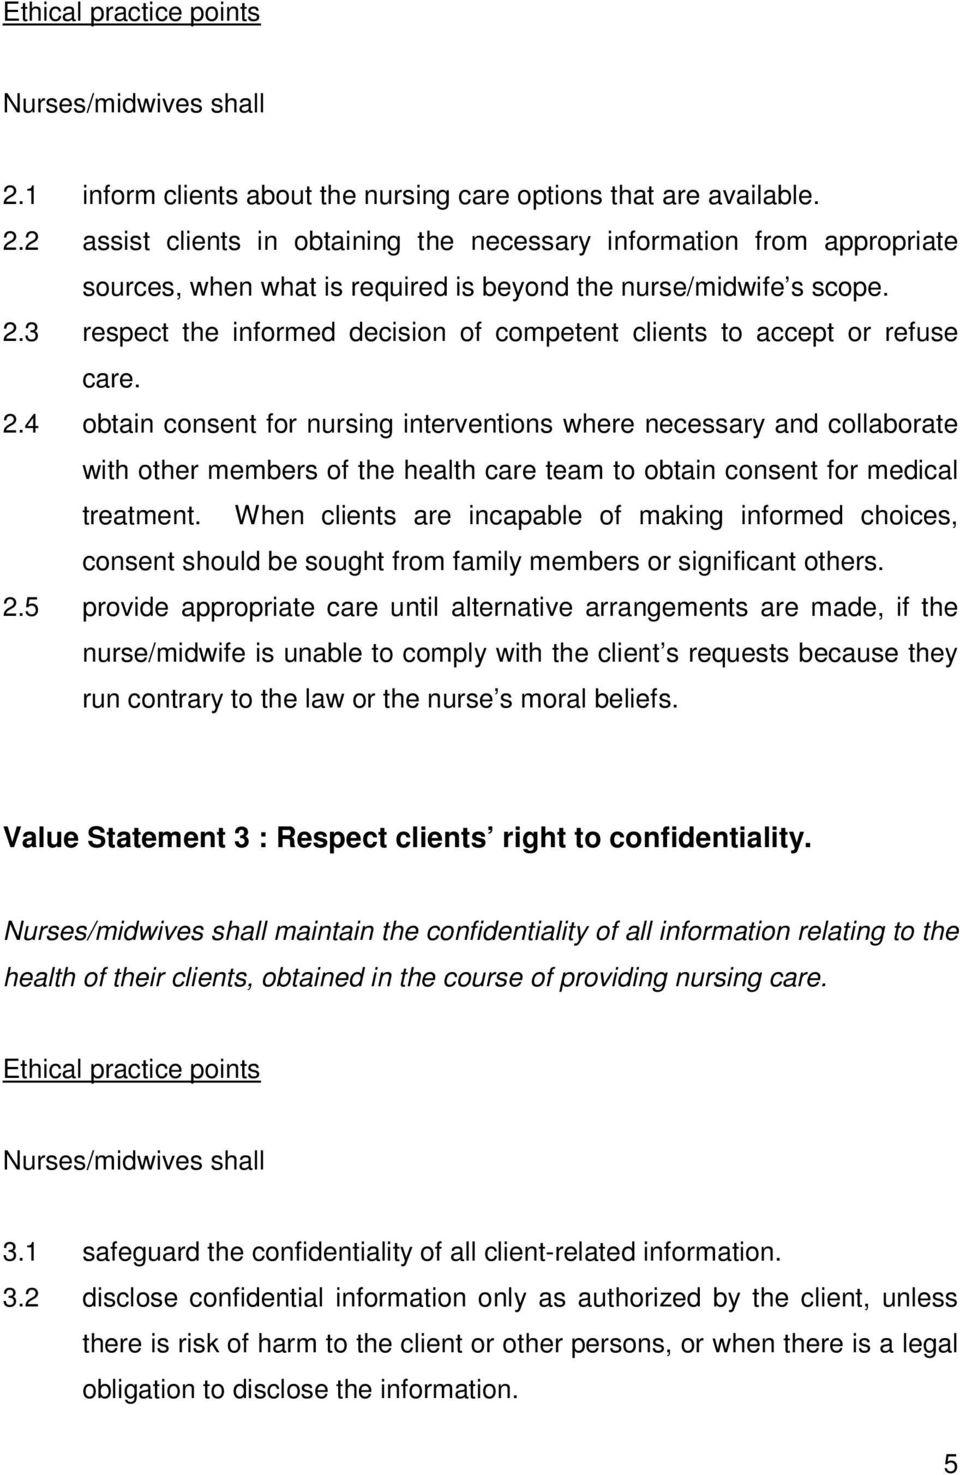 4 obtain consent for nursing interventions where necessary and collaborate with other members of the health care team to obtain consent for medical treatment.